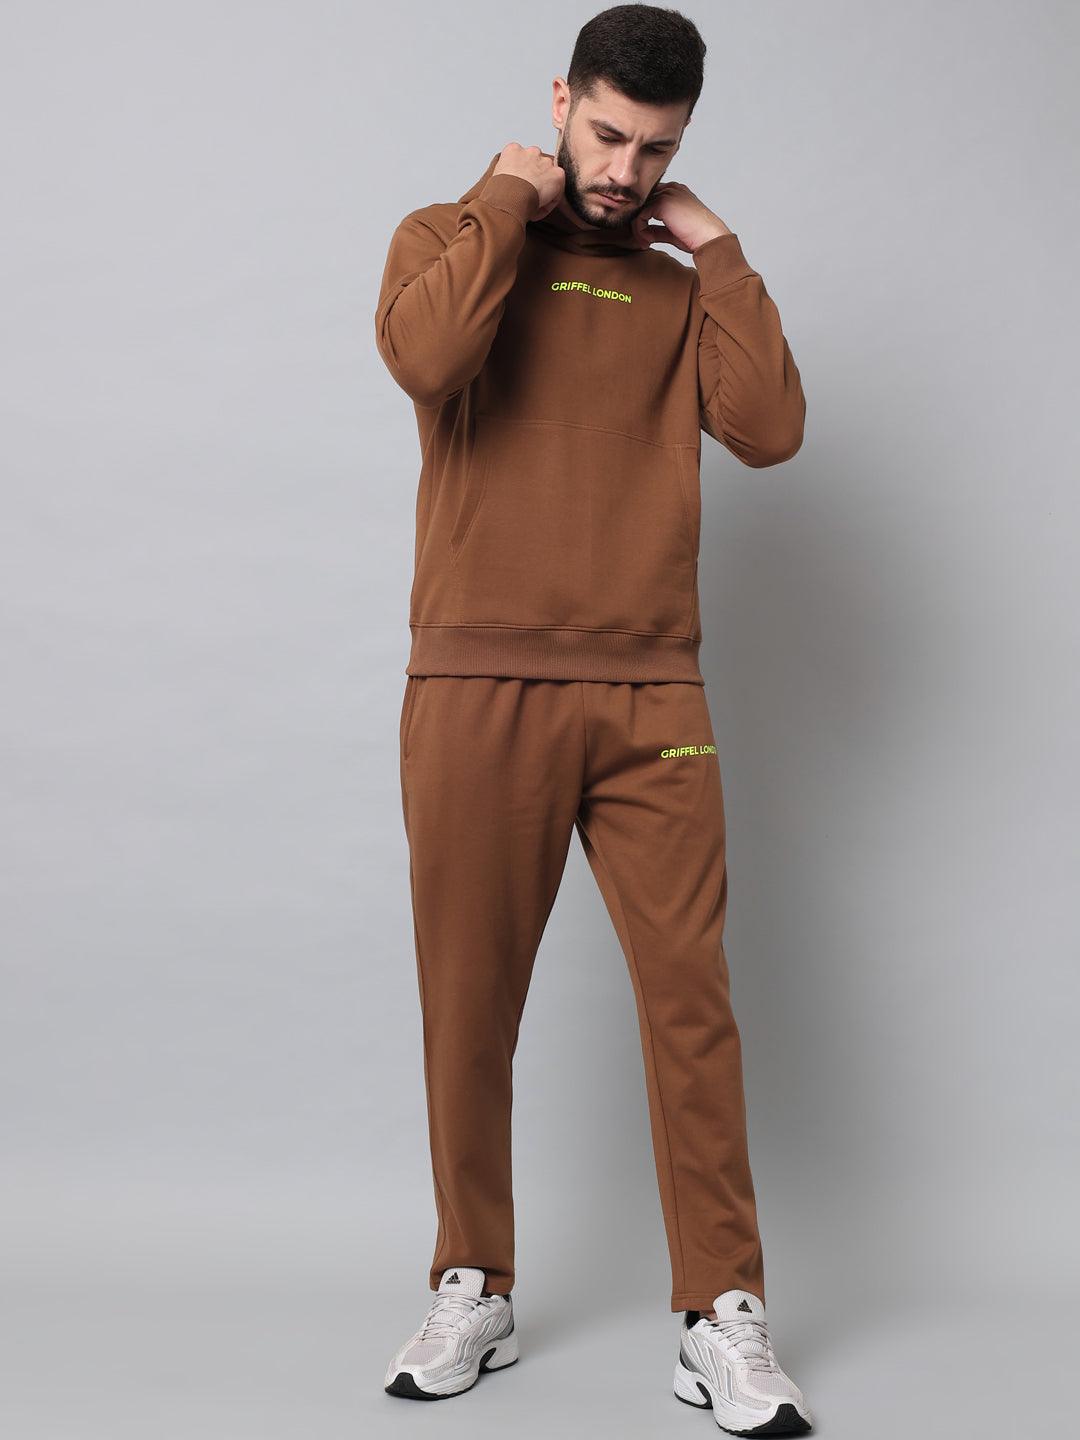 Griffel Men's Front Logo Solid Fleece Basic Hoodie and Joggers Full set Brown Tracksuit - griffel